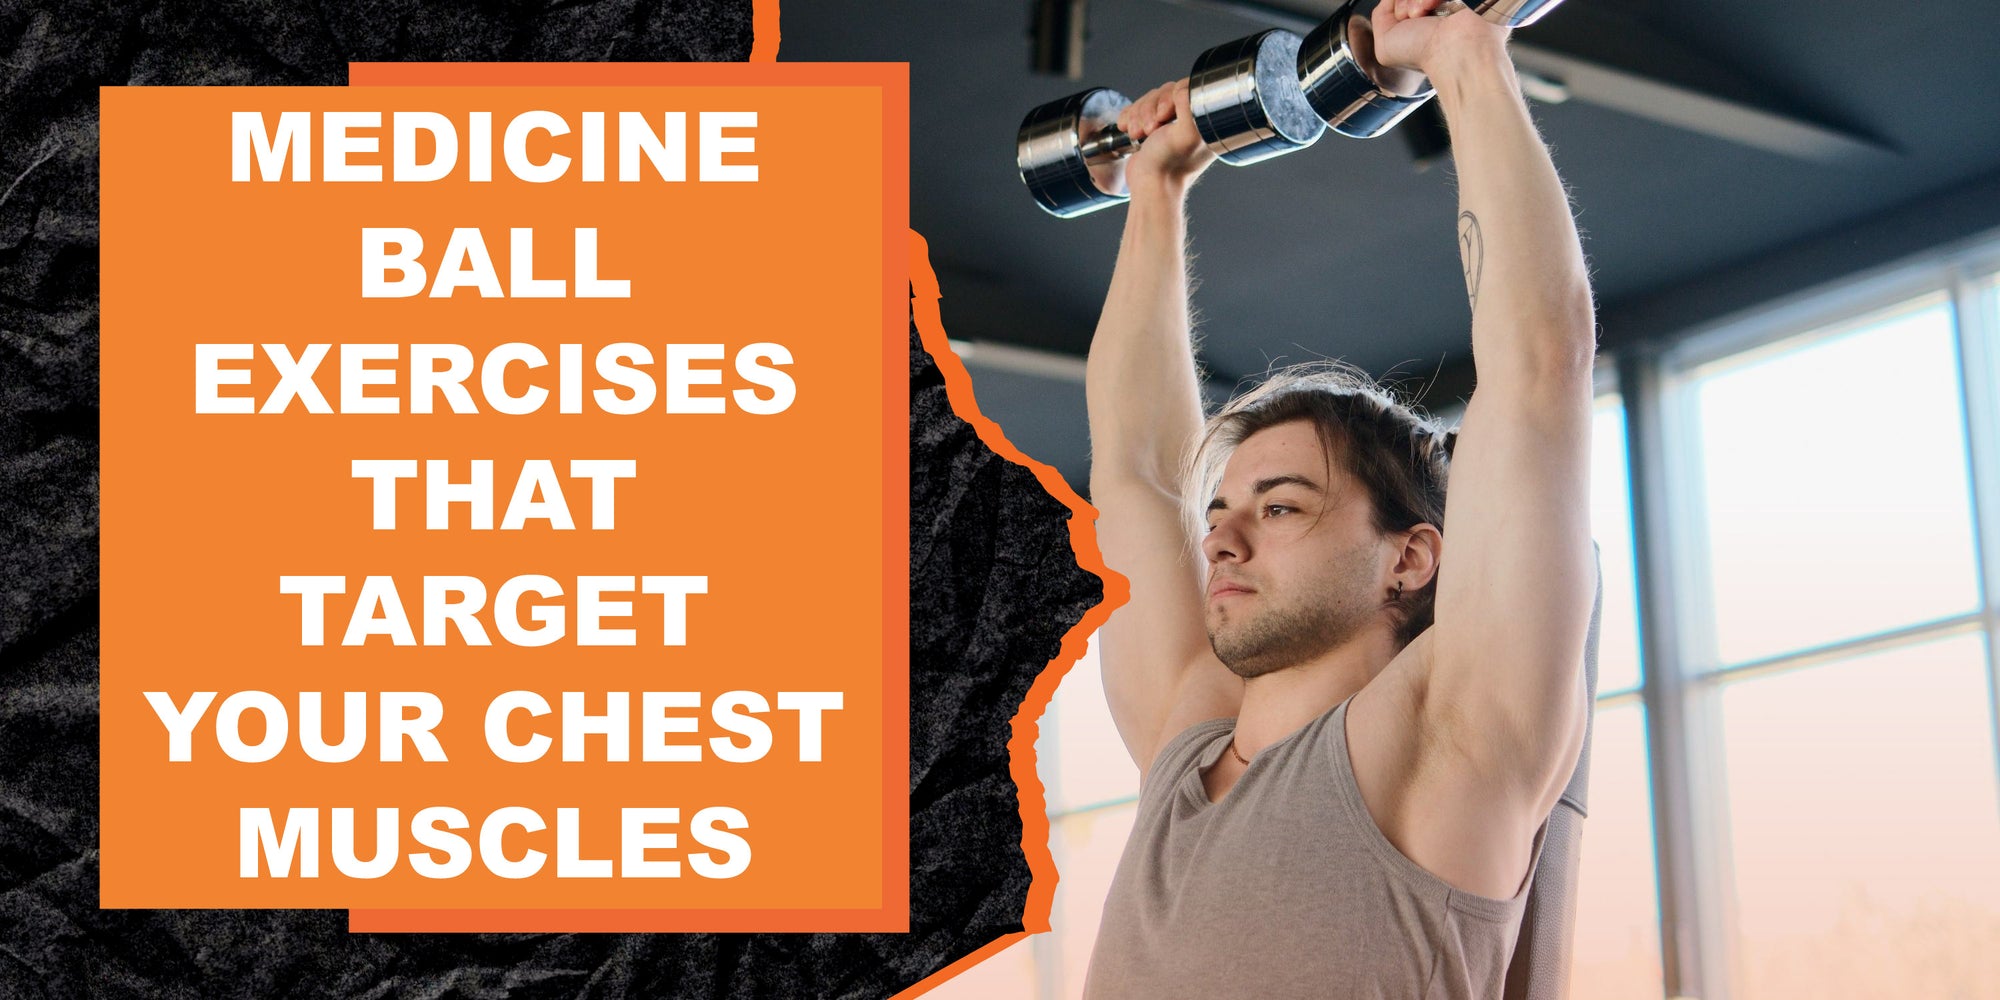 Medicine Ball Exercises That Target Your Chest Muscles